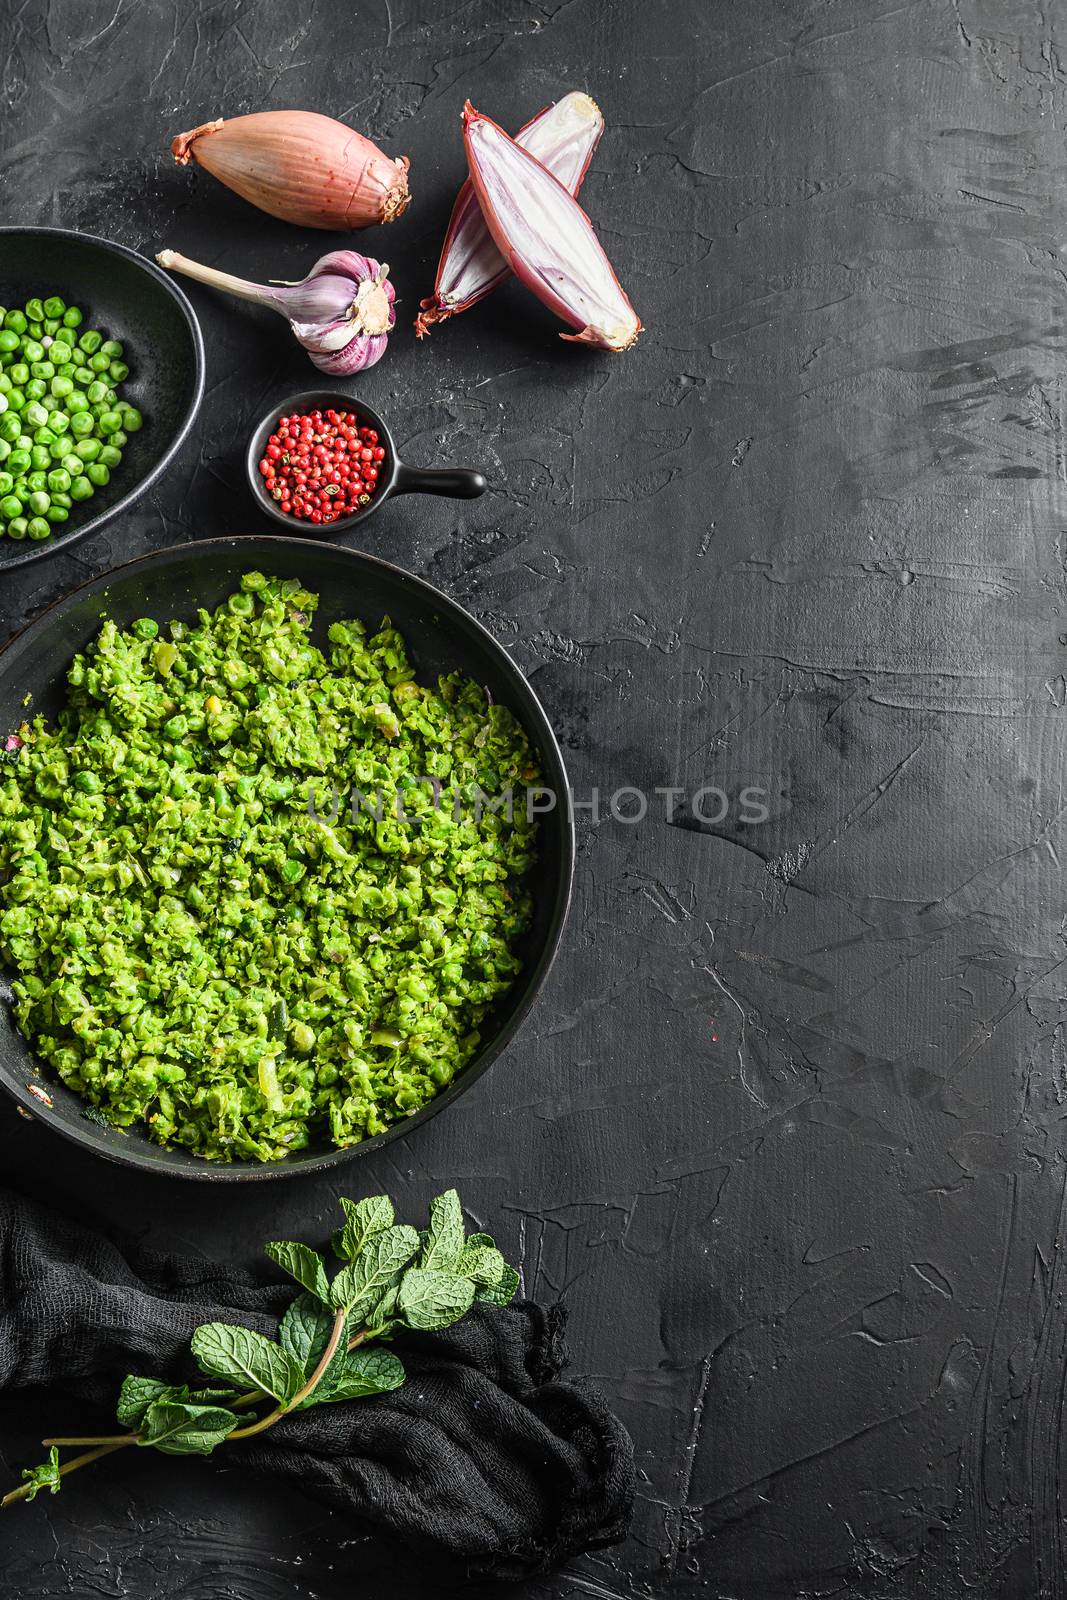 mushy peas gluten free cooked frying pan and peas in bowl with mint shallot pepper and salt s black stone surface organic keto food top view space for text vertical concept.